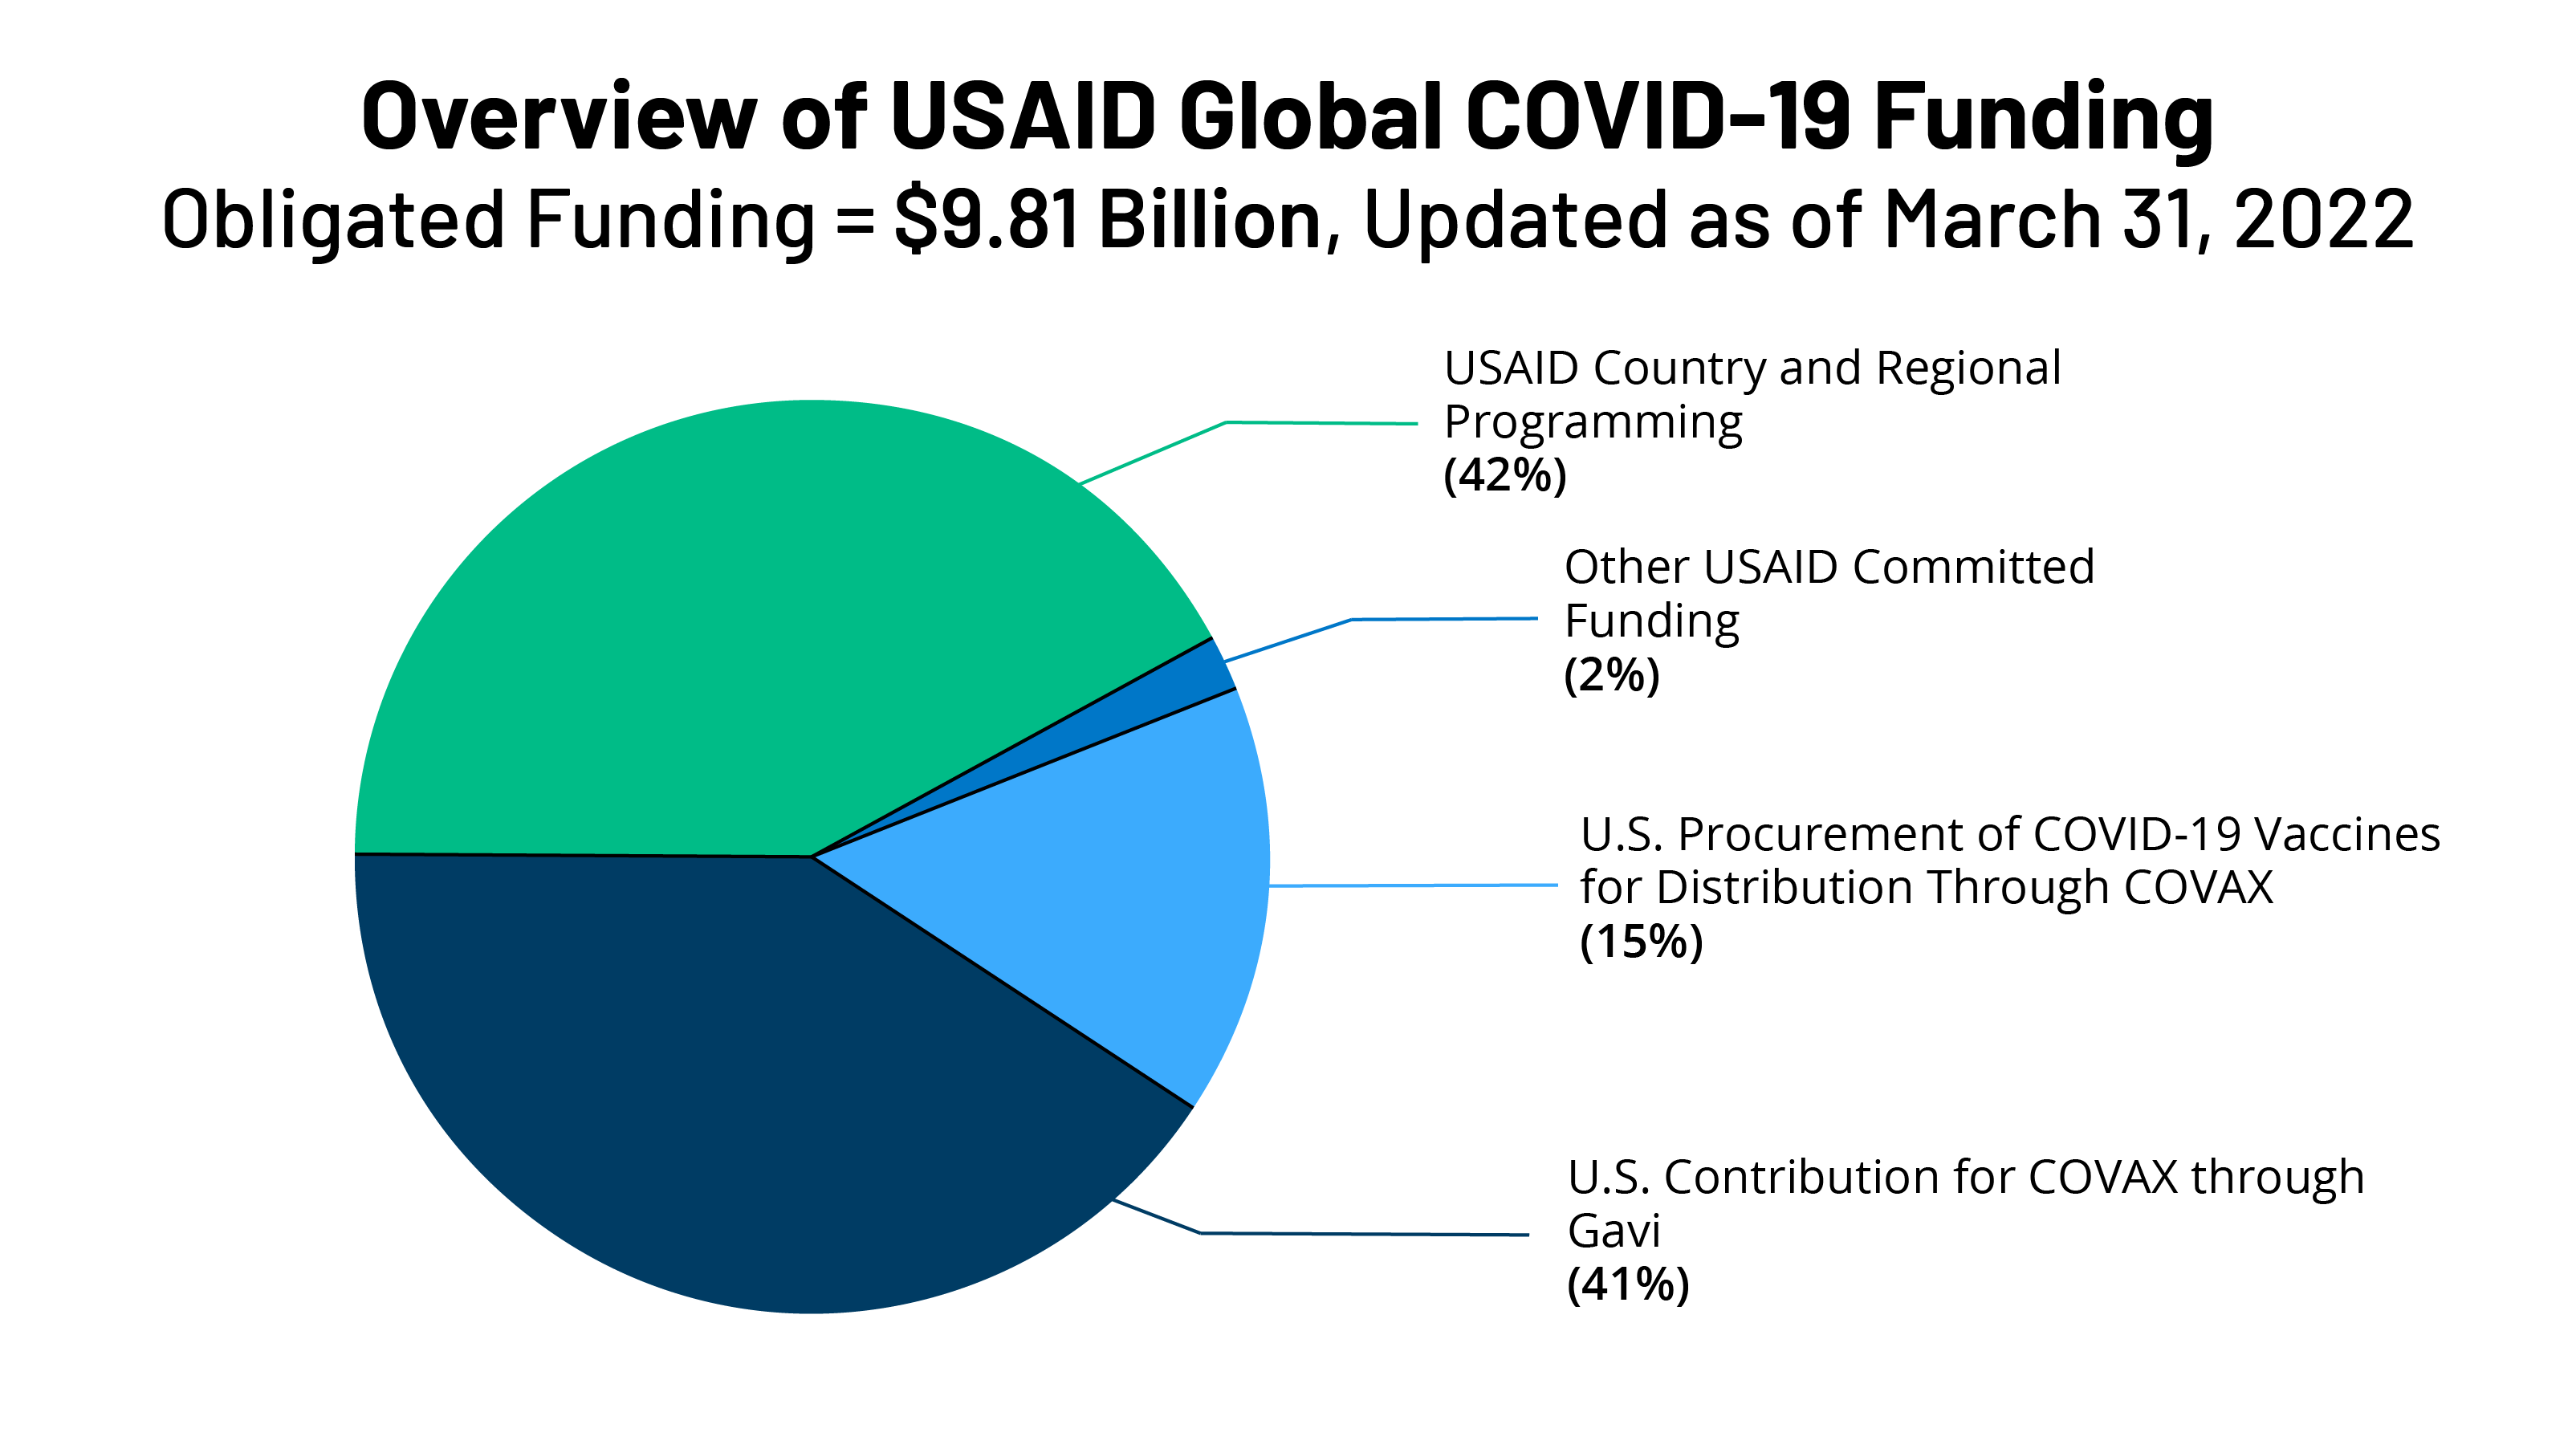 U.S. Global Funding for COVID-19 by Country and Region: An Analysis of  USAID Data